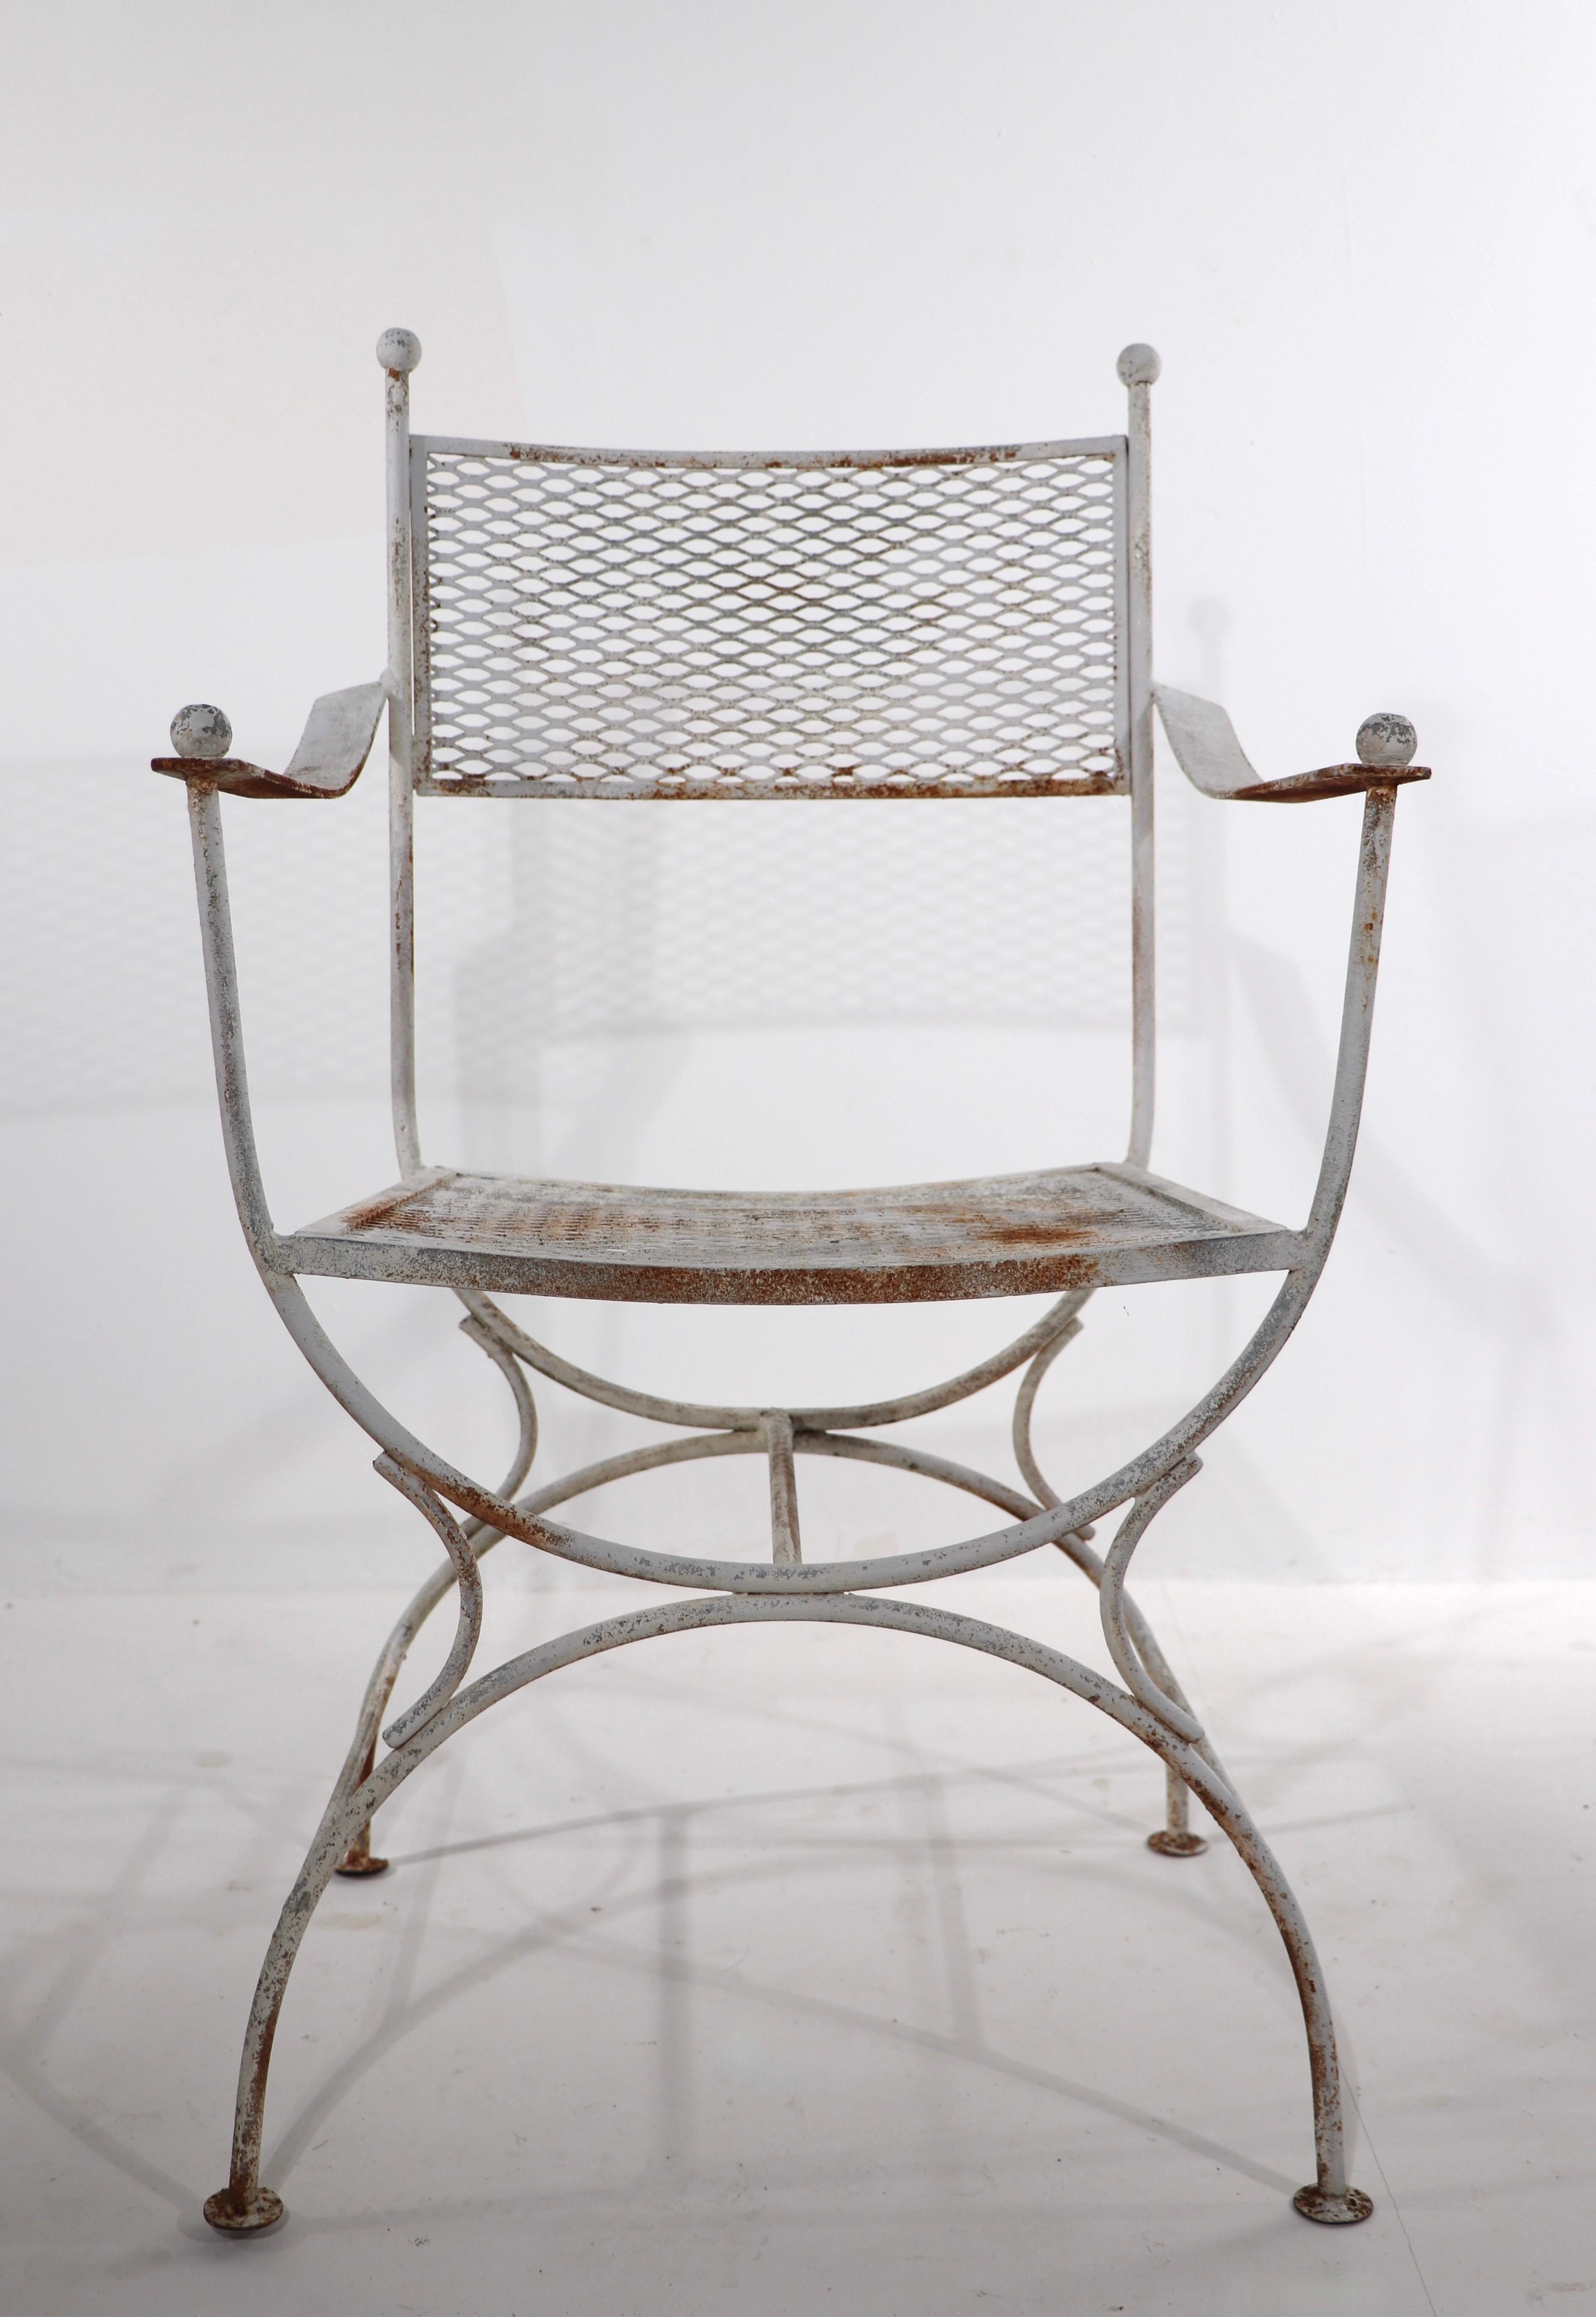 American Pr. Wrought Iron Patio Garden Chairs attributed to Salterini